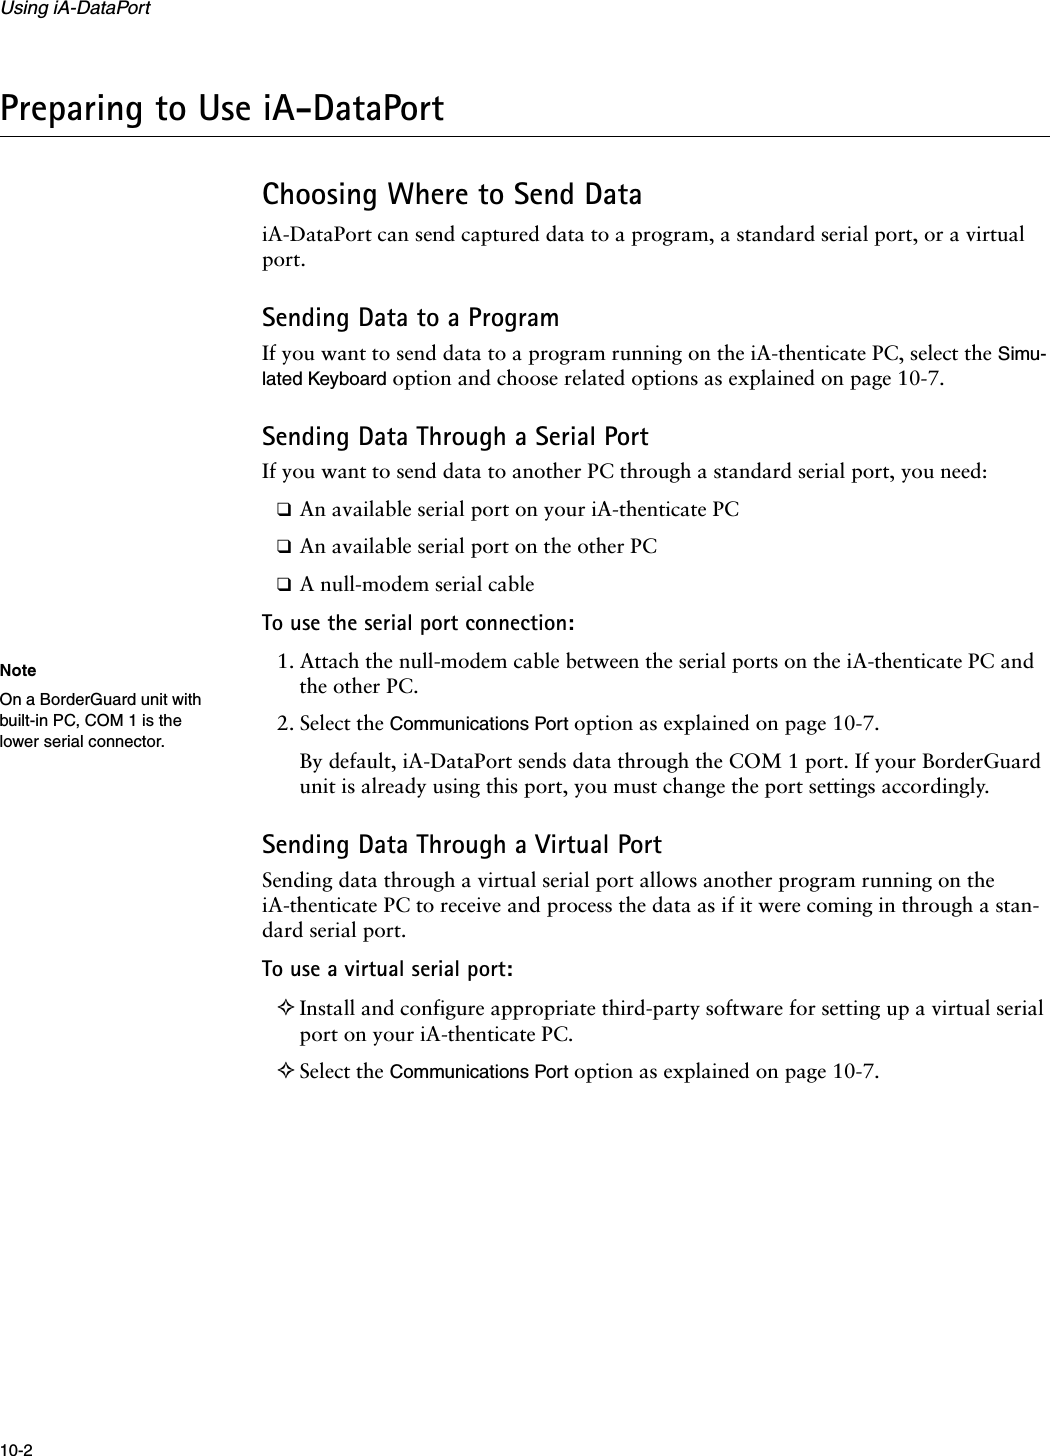 Using iA-DataPort10-2Preparing to Use iA-DataPortChoosing Where to Send DataiA-DataPort can send captured data to a program, a standard serial port, or a virtual port.Sending Data to a ProgramIf you want to send data to a program running on the iA-thenticate PC, select the Simu-lated Keyboard option and choose related options as explained on page 10-7.Sending Data Through a Serial PortIf you want to send data to another PC through a standard serial port, you need:❑An available serial port on your iA-thenticate PC❑An available serial port on the other PC❑A null-modem serial cableTo use the serial port connection:1. Attach the null-modem cable between the serial ports on the iA-thenticate PC and the other PC.2. Select the Communications Port option as explained on page 10-7.By default, iA-DataPort sends data through the COM 1 port. If your BorderGuard unit is already using this port, you must change the port settings accordingly.Sending Data Through a Virtual PortSending data through a virtual serial port allows another program running on the iA-thenticate PC to receive and process the data as if it were coming in through a stan-dard serial port.To use a virtual serial port:✧Install and configure appropriate third-party software for setting up a virtual serial port on your iA-thenticate PC.✧Select the Communications Port option as explained on page 10-7.NoteOn a BorderGuard unit with built-in PC, COM 1 is the lower serial connector.